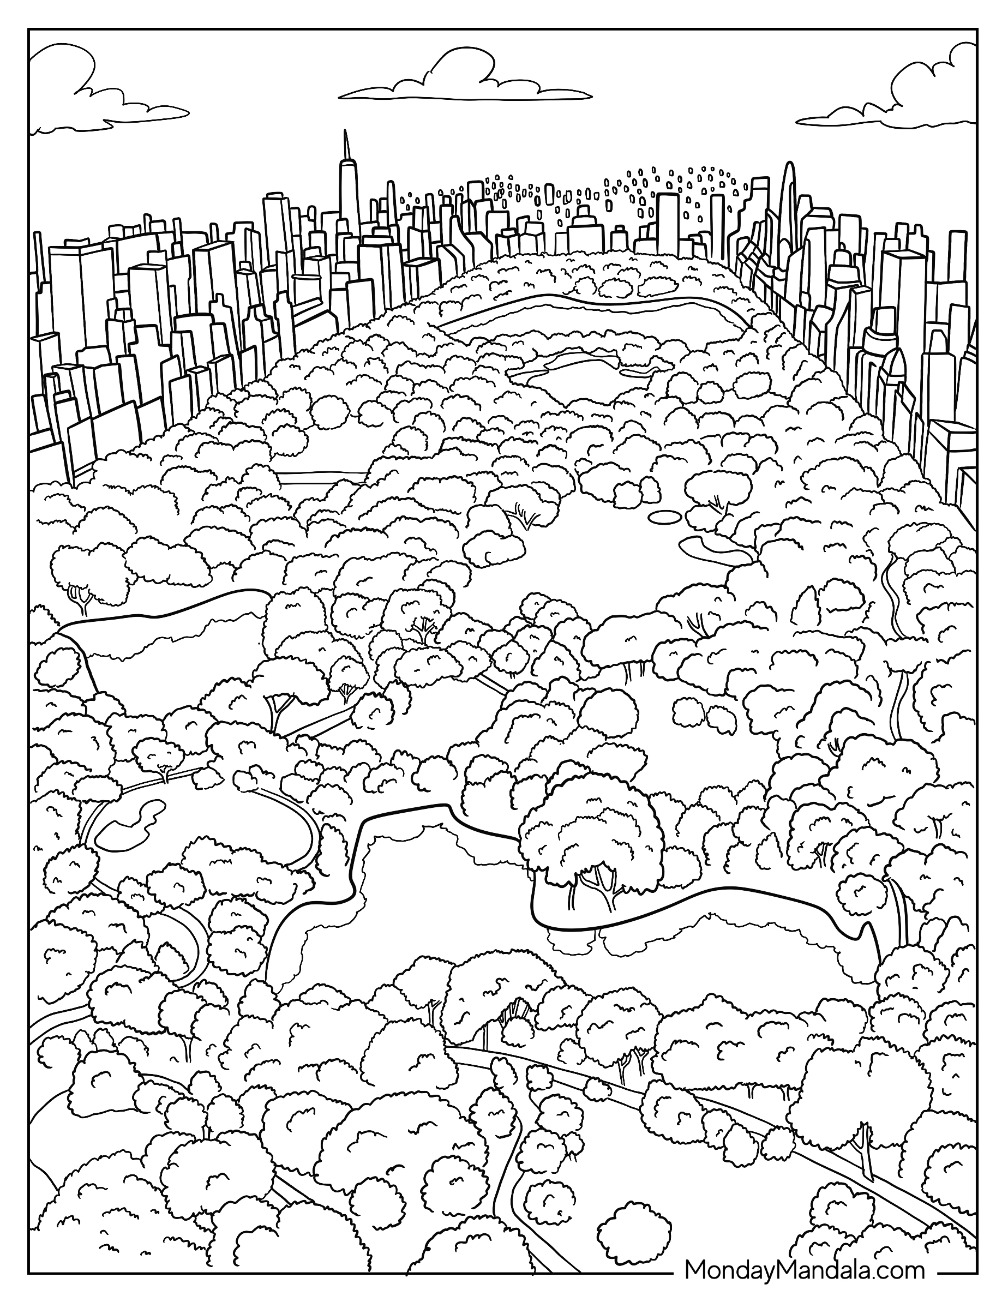 20 New York Coloring Pages (Free PDF ...